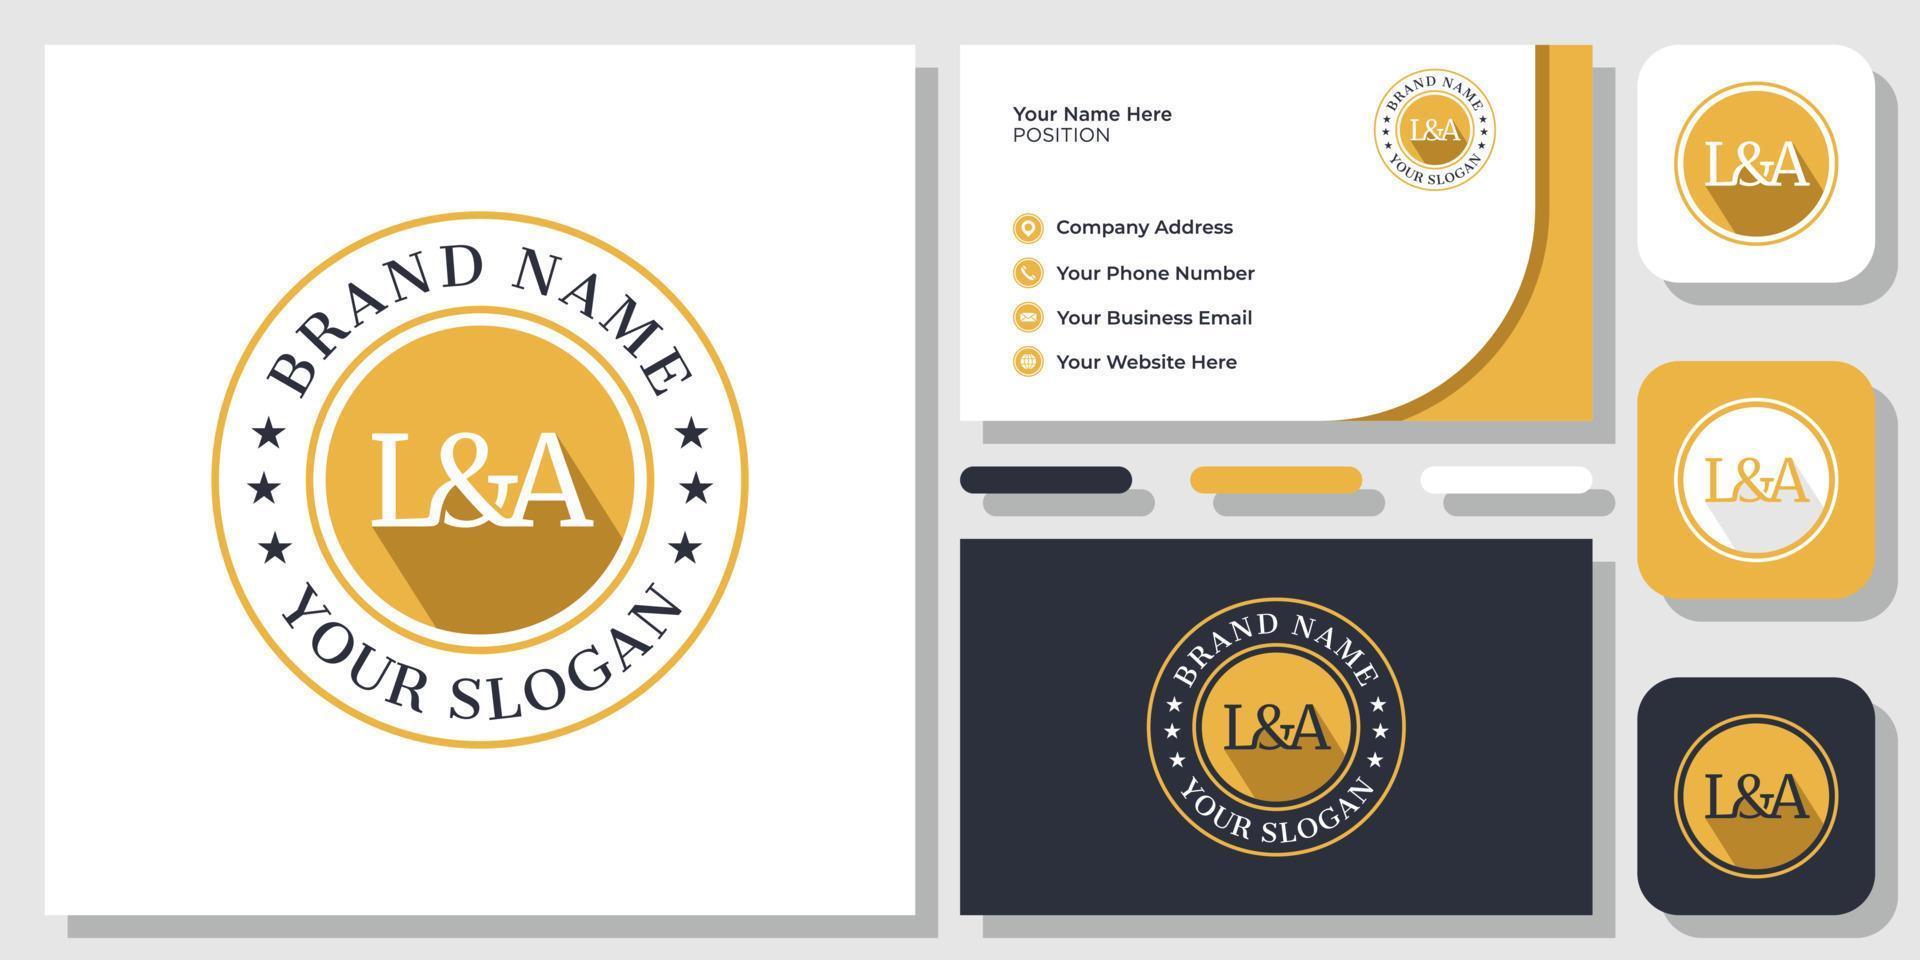 Initials Letter LA AL Vintage Stamp Label Circle Circular Star Logo Design with Business Card Template vector